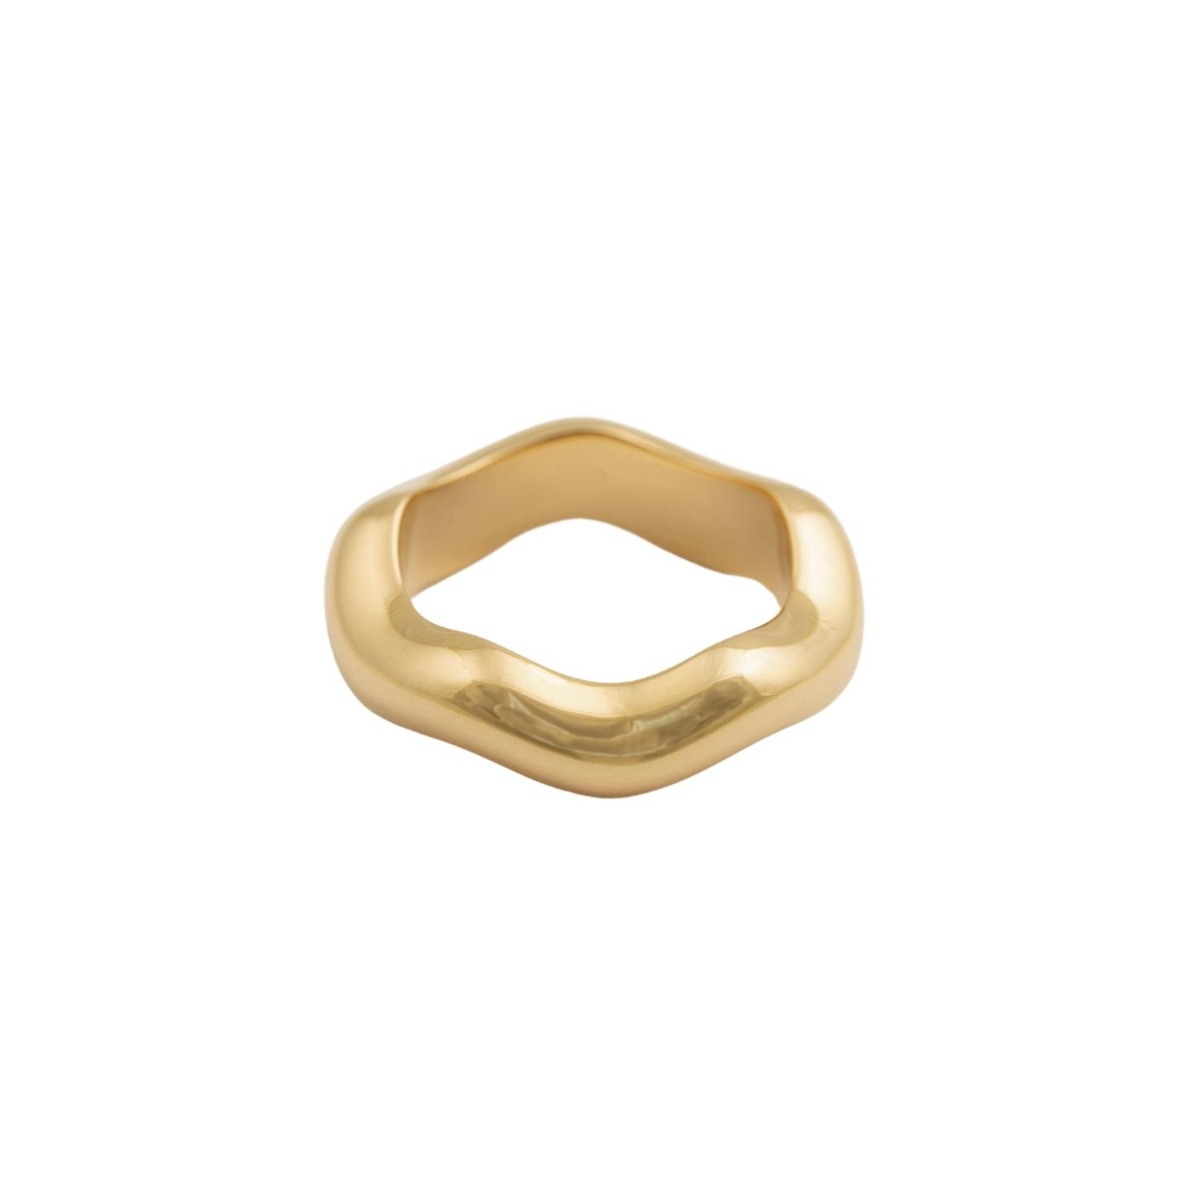 Syster P Ring Bolded Wavy Guld 16mm